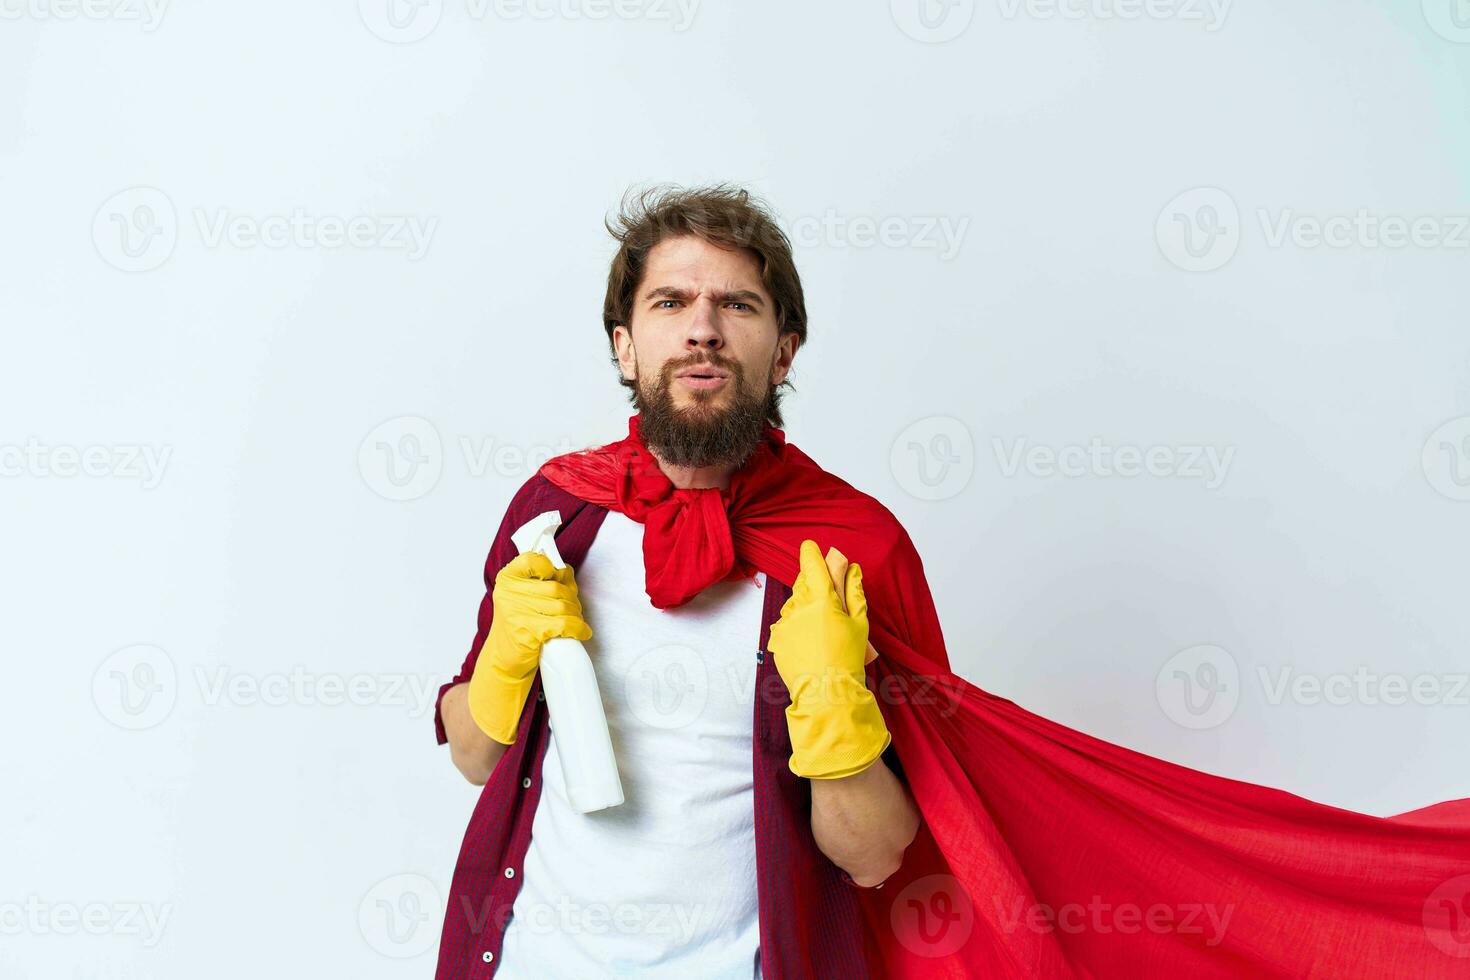 cleaner wearing a red coat detergent service housework photo